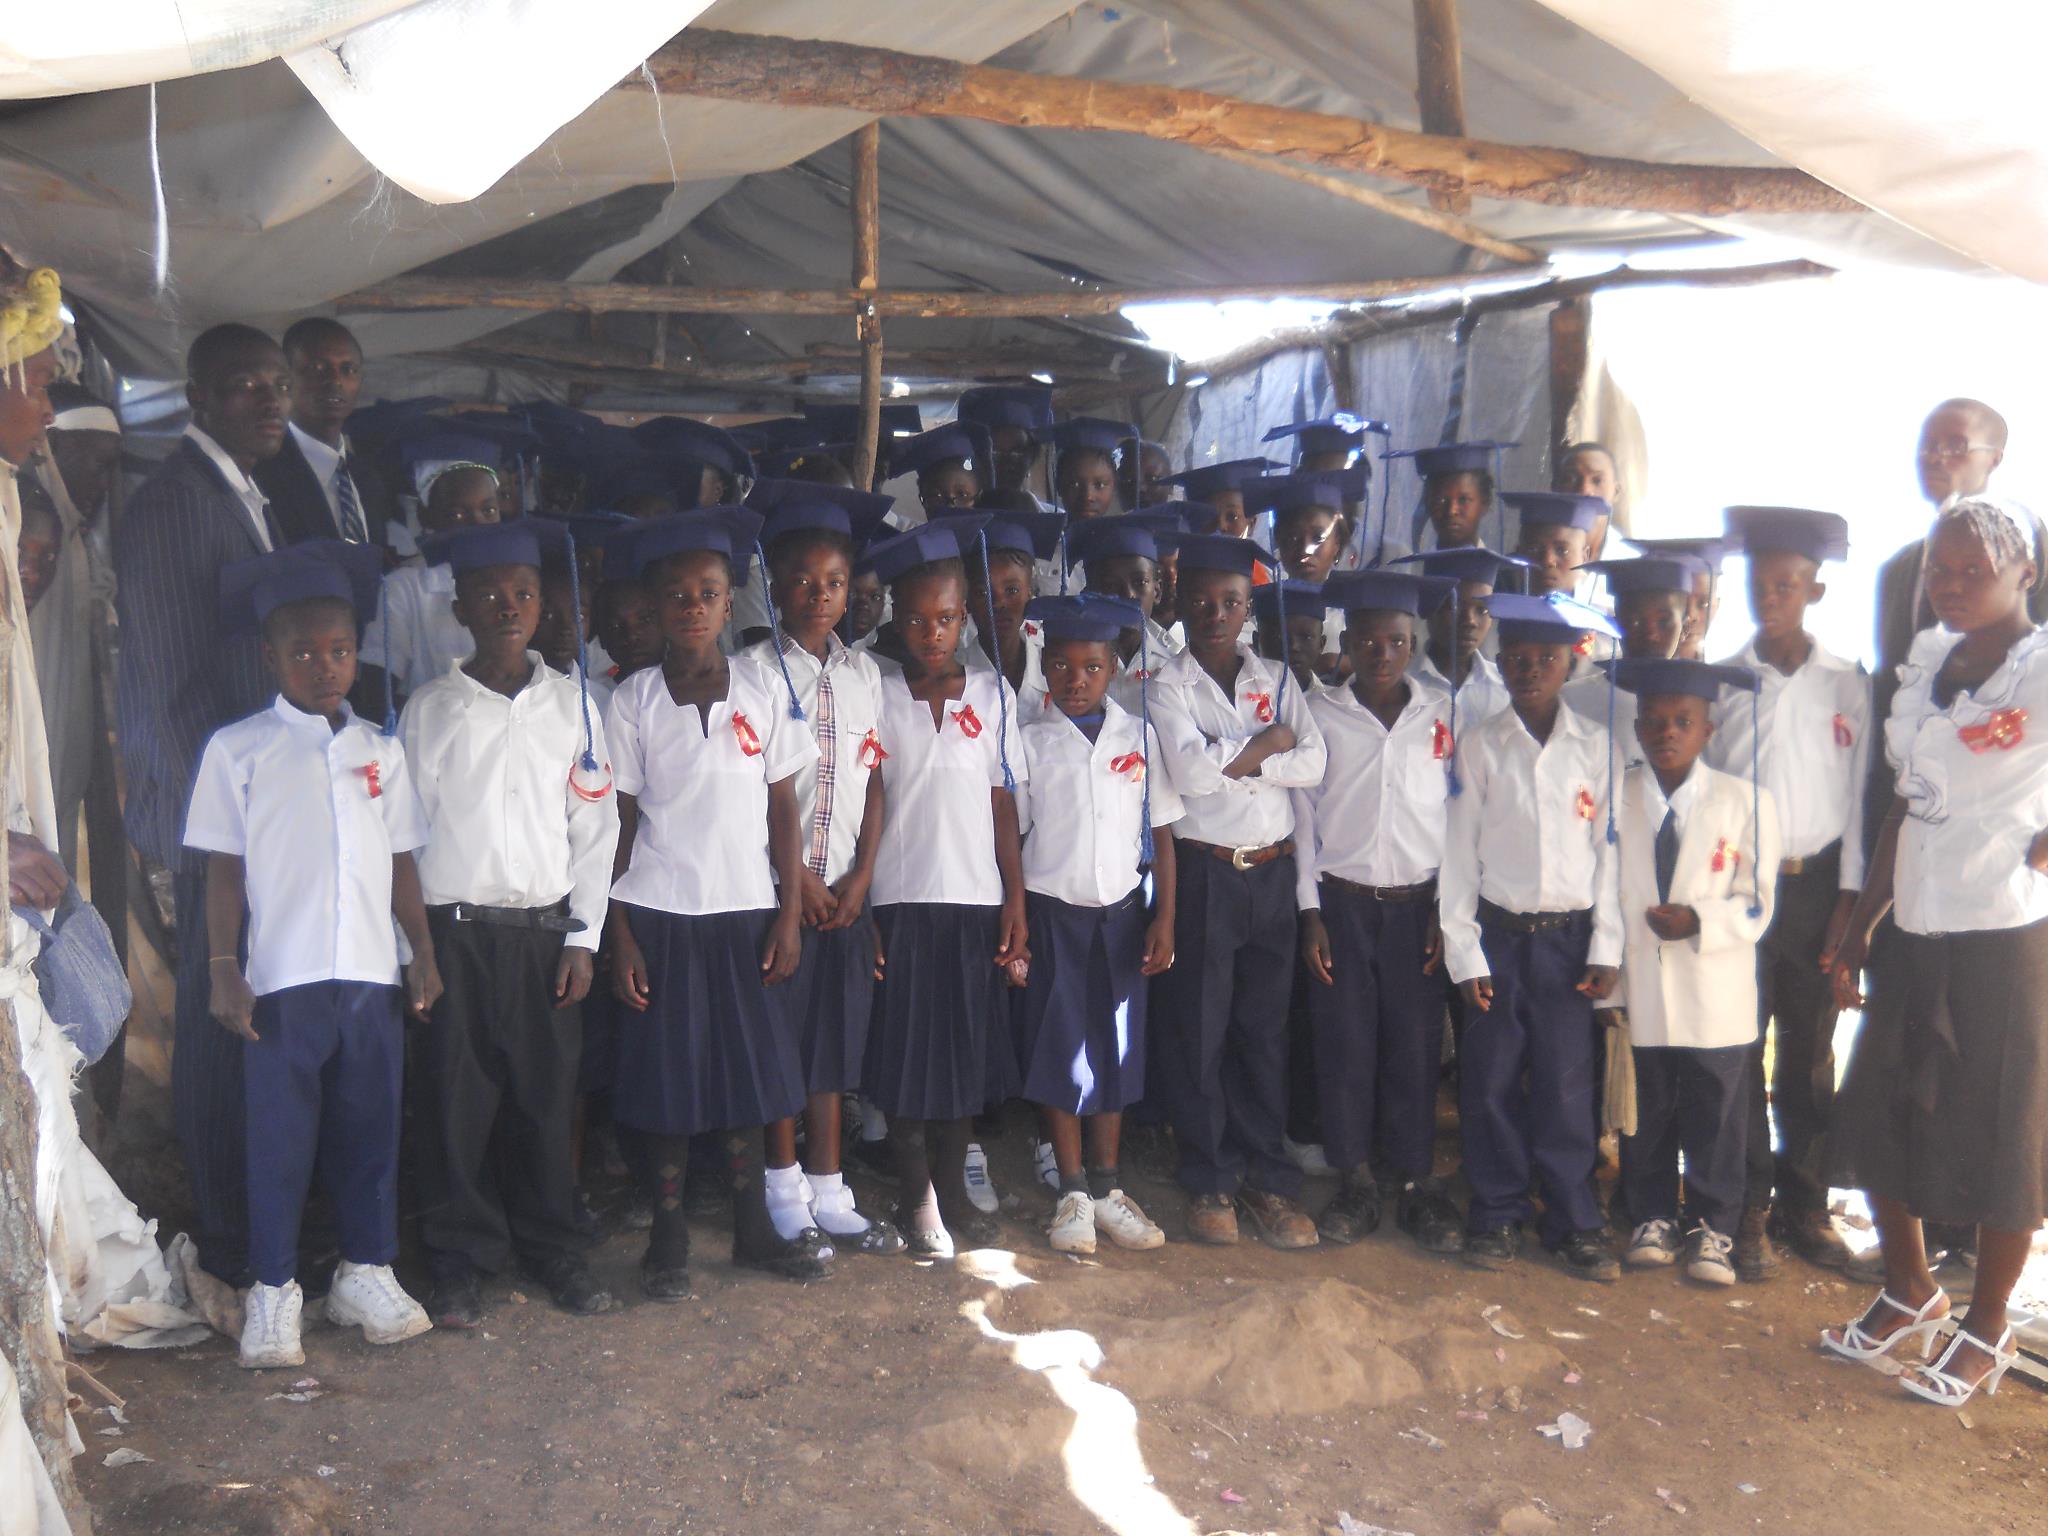 The children in Chapelle who completed the Greatest Journey course.